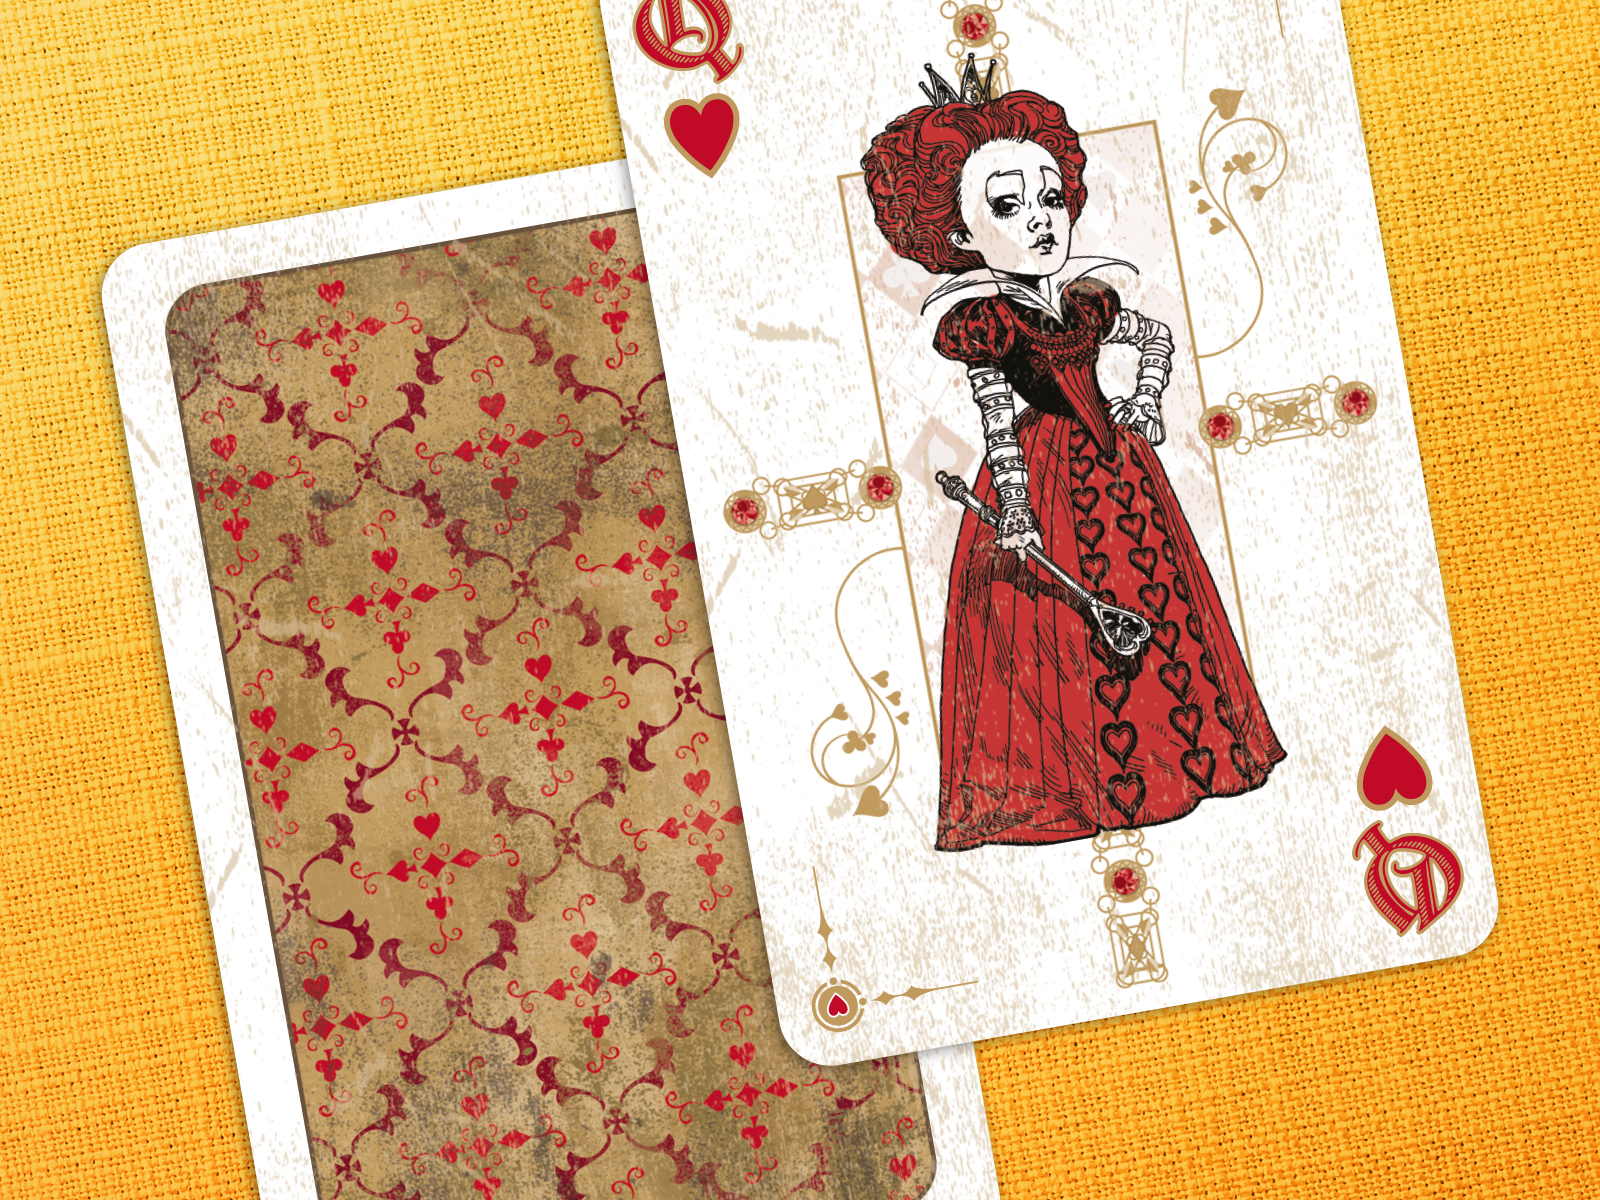 alice-in-wonderland-playing-cards-by-fabio-michelan-dribbble-dribbble